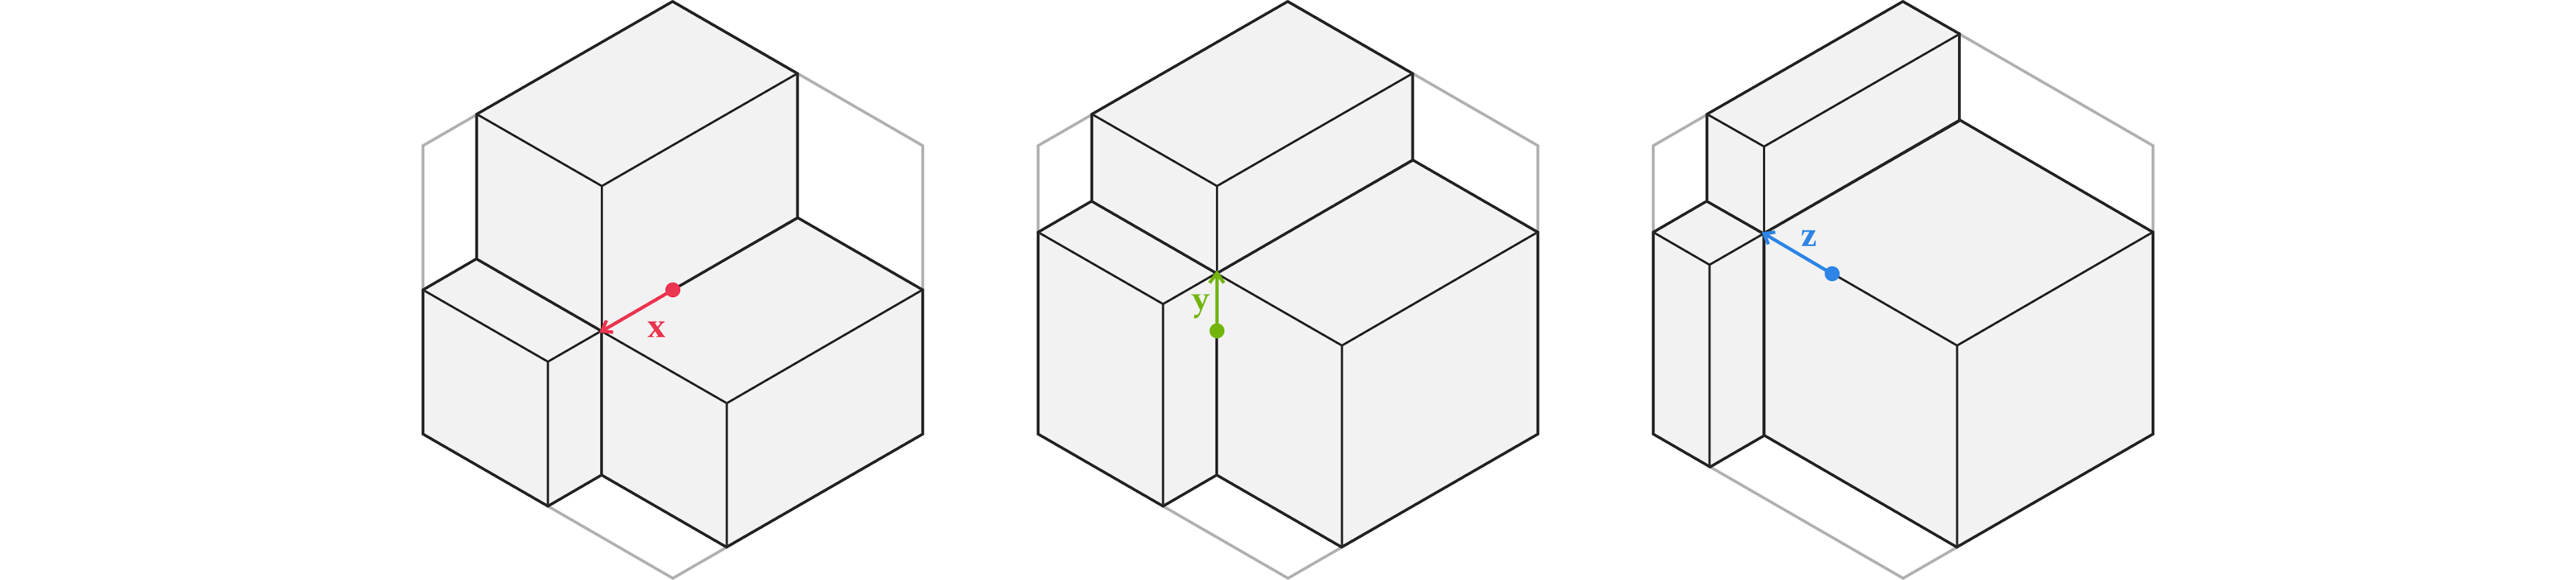 Figure 3 - center can move on the x, y and z axis